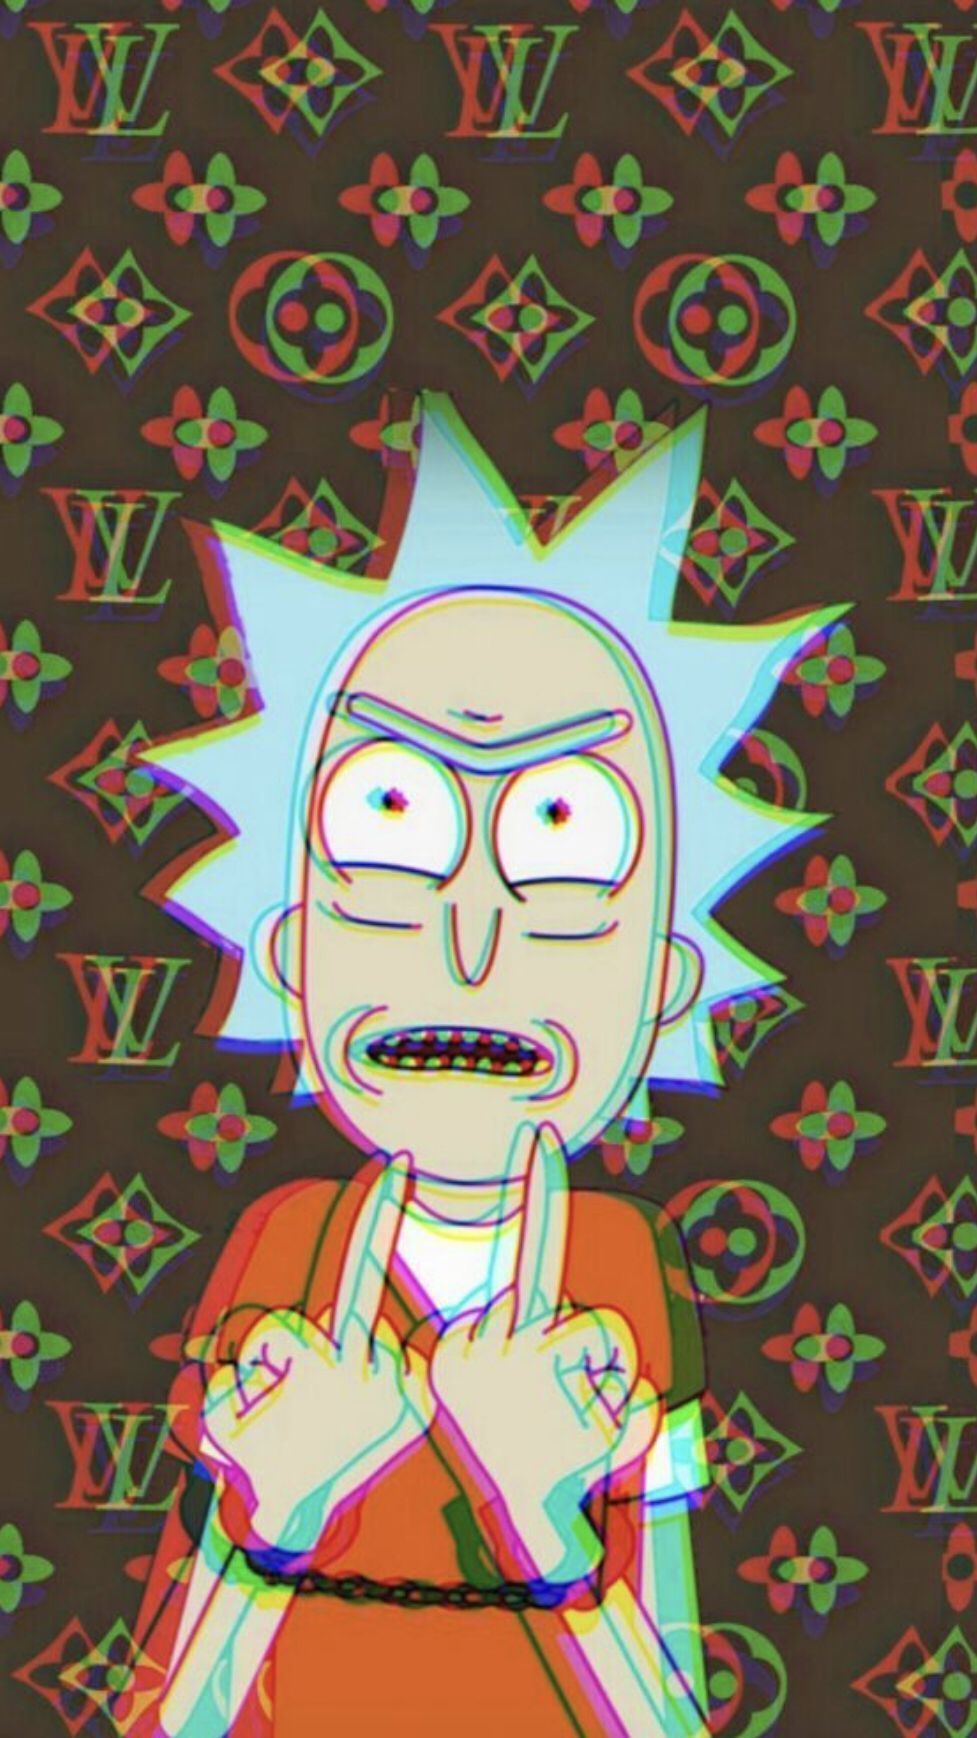 Rick And Morty Aesthetic Wallpaper